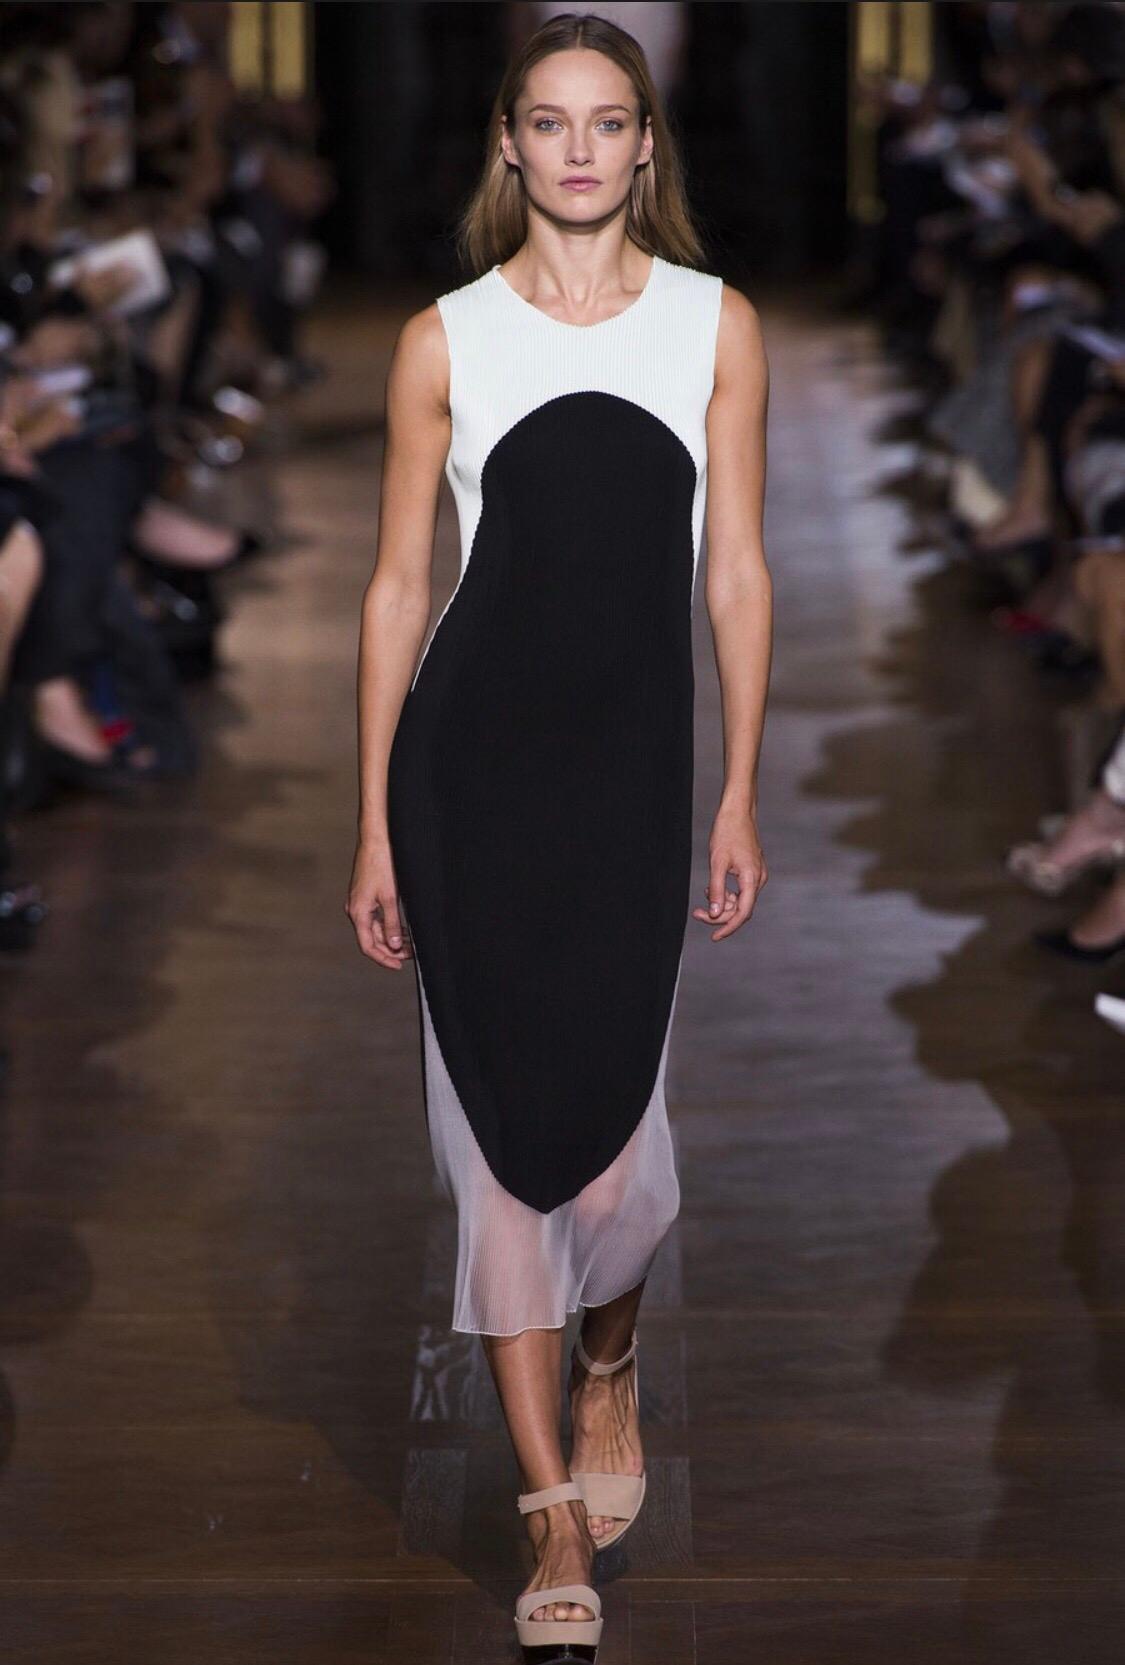 Amazing STELLA MCCARTNEY Spring Summer 2013 pleated color block dress! At first look, I assumed this was an Issey Miyake Pleats Please dress. 
Features mint green on the top, black body and transparent clear sheer panel on the bottom. Simply slips